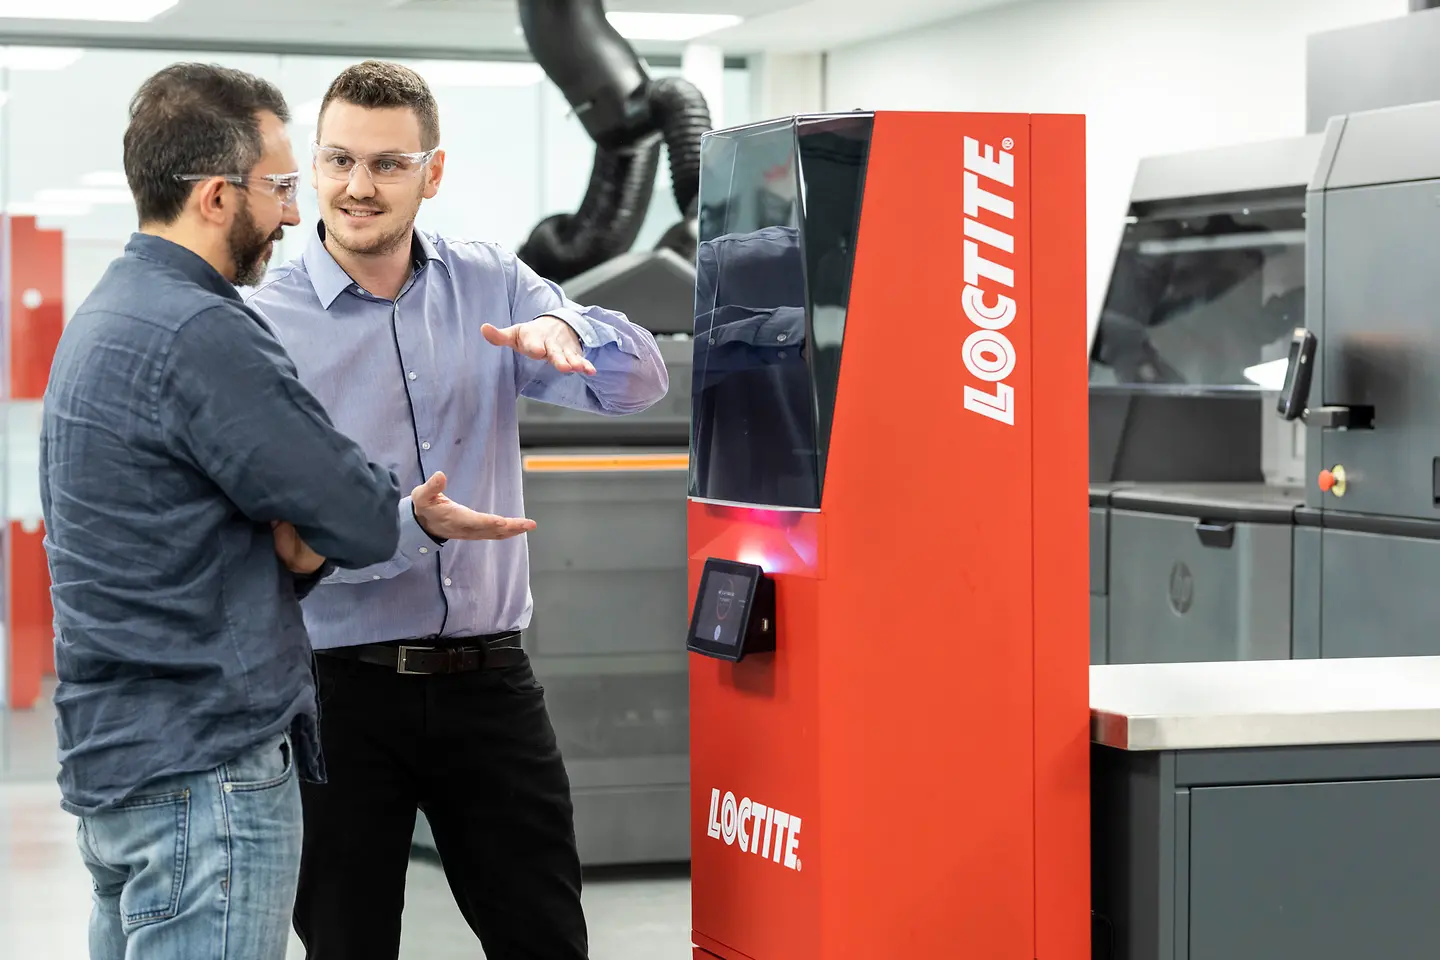 At Formnext Henkel will also introduce its new Loctite 3D Printer